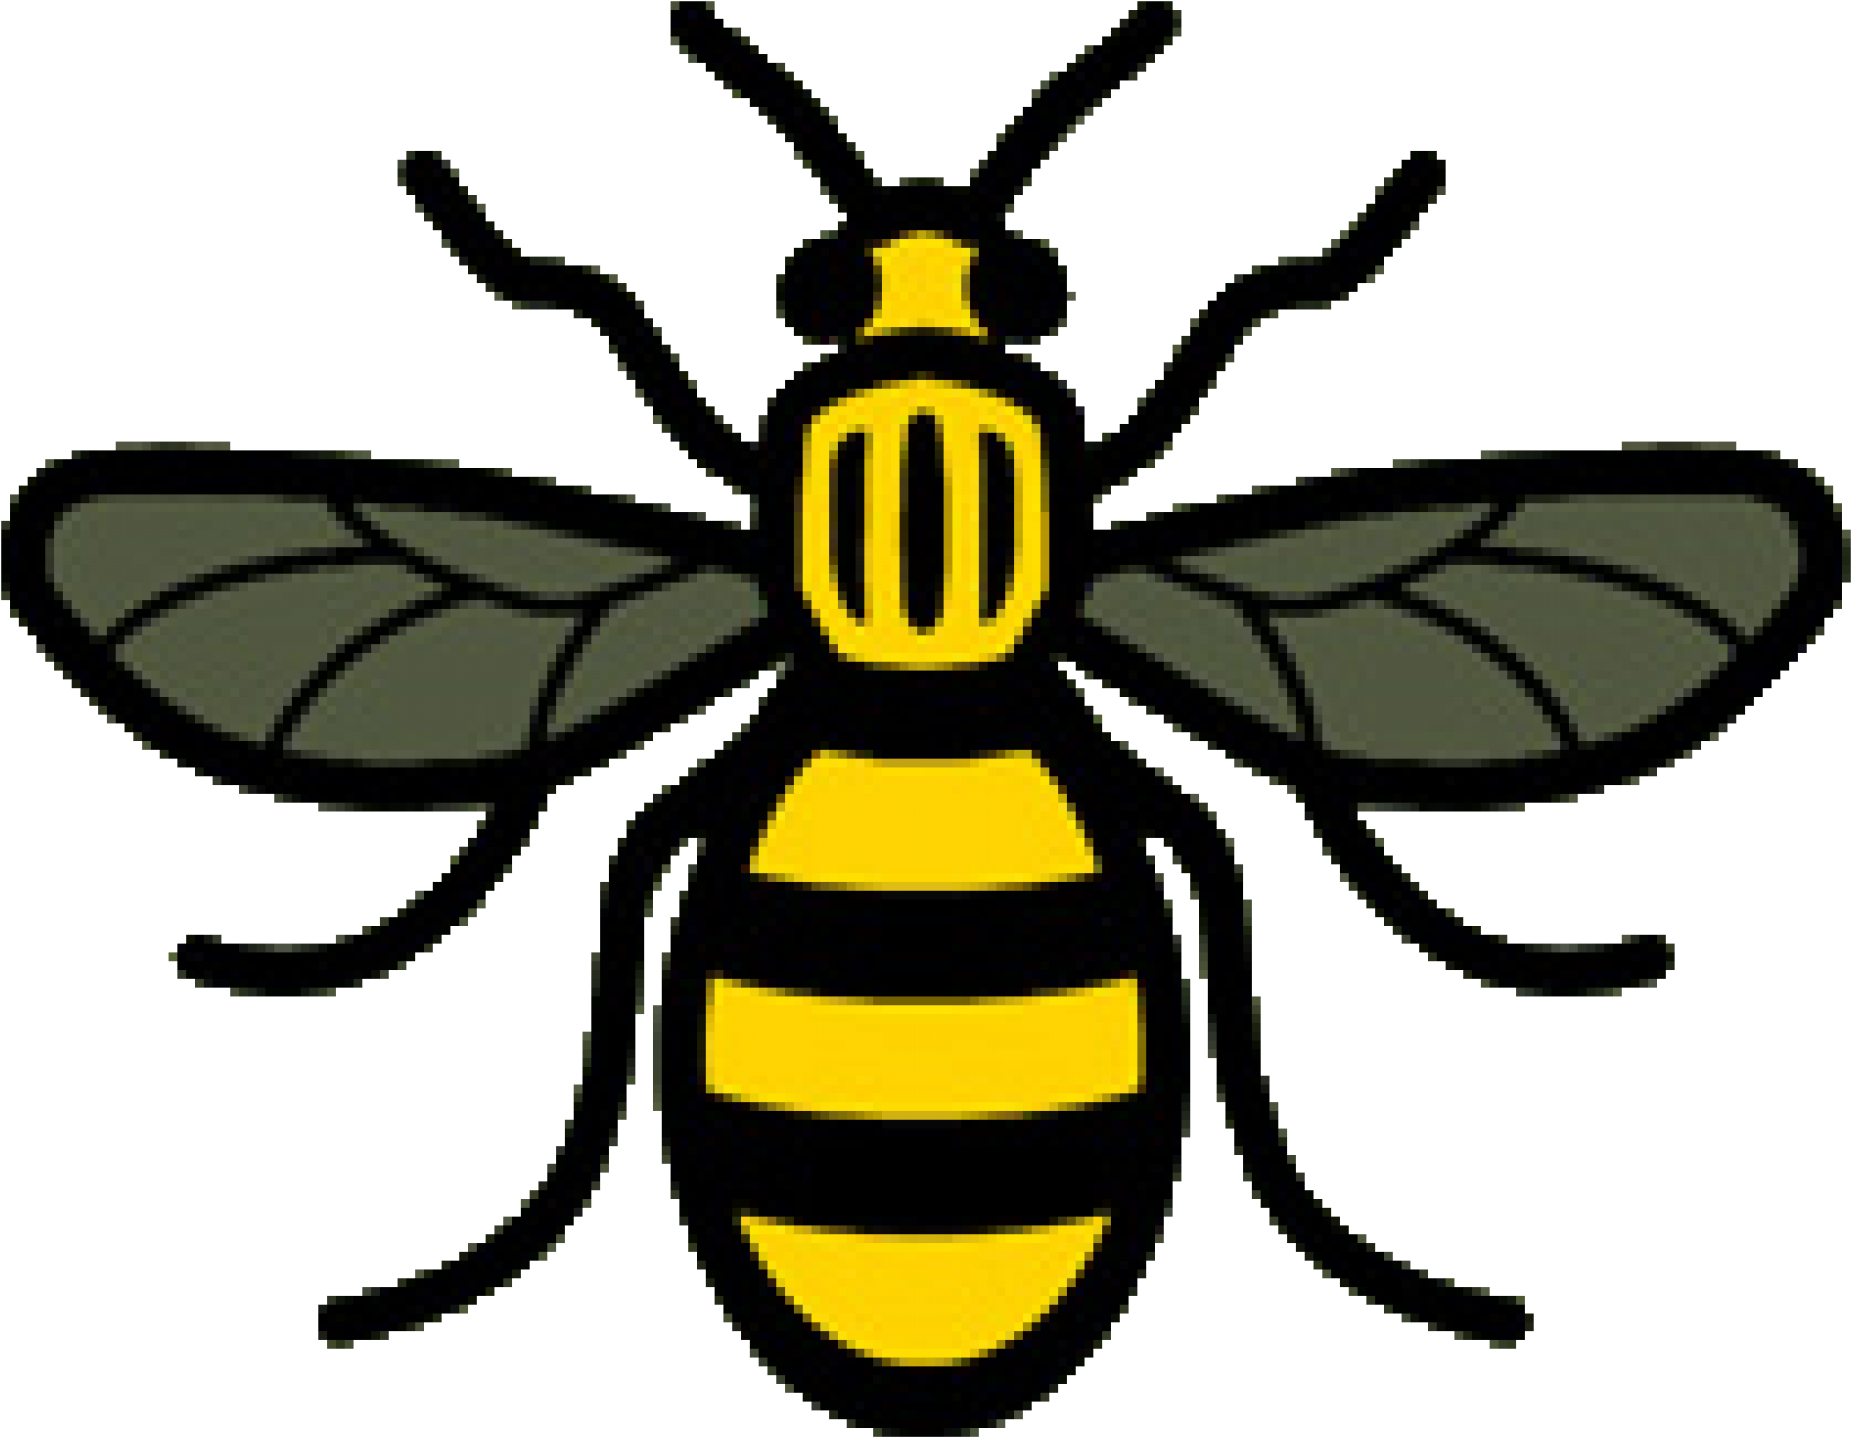 I Love Lucy Logo Vector Download - Manchester Worker Bee (1920x1920)